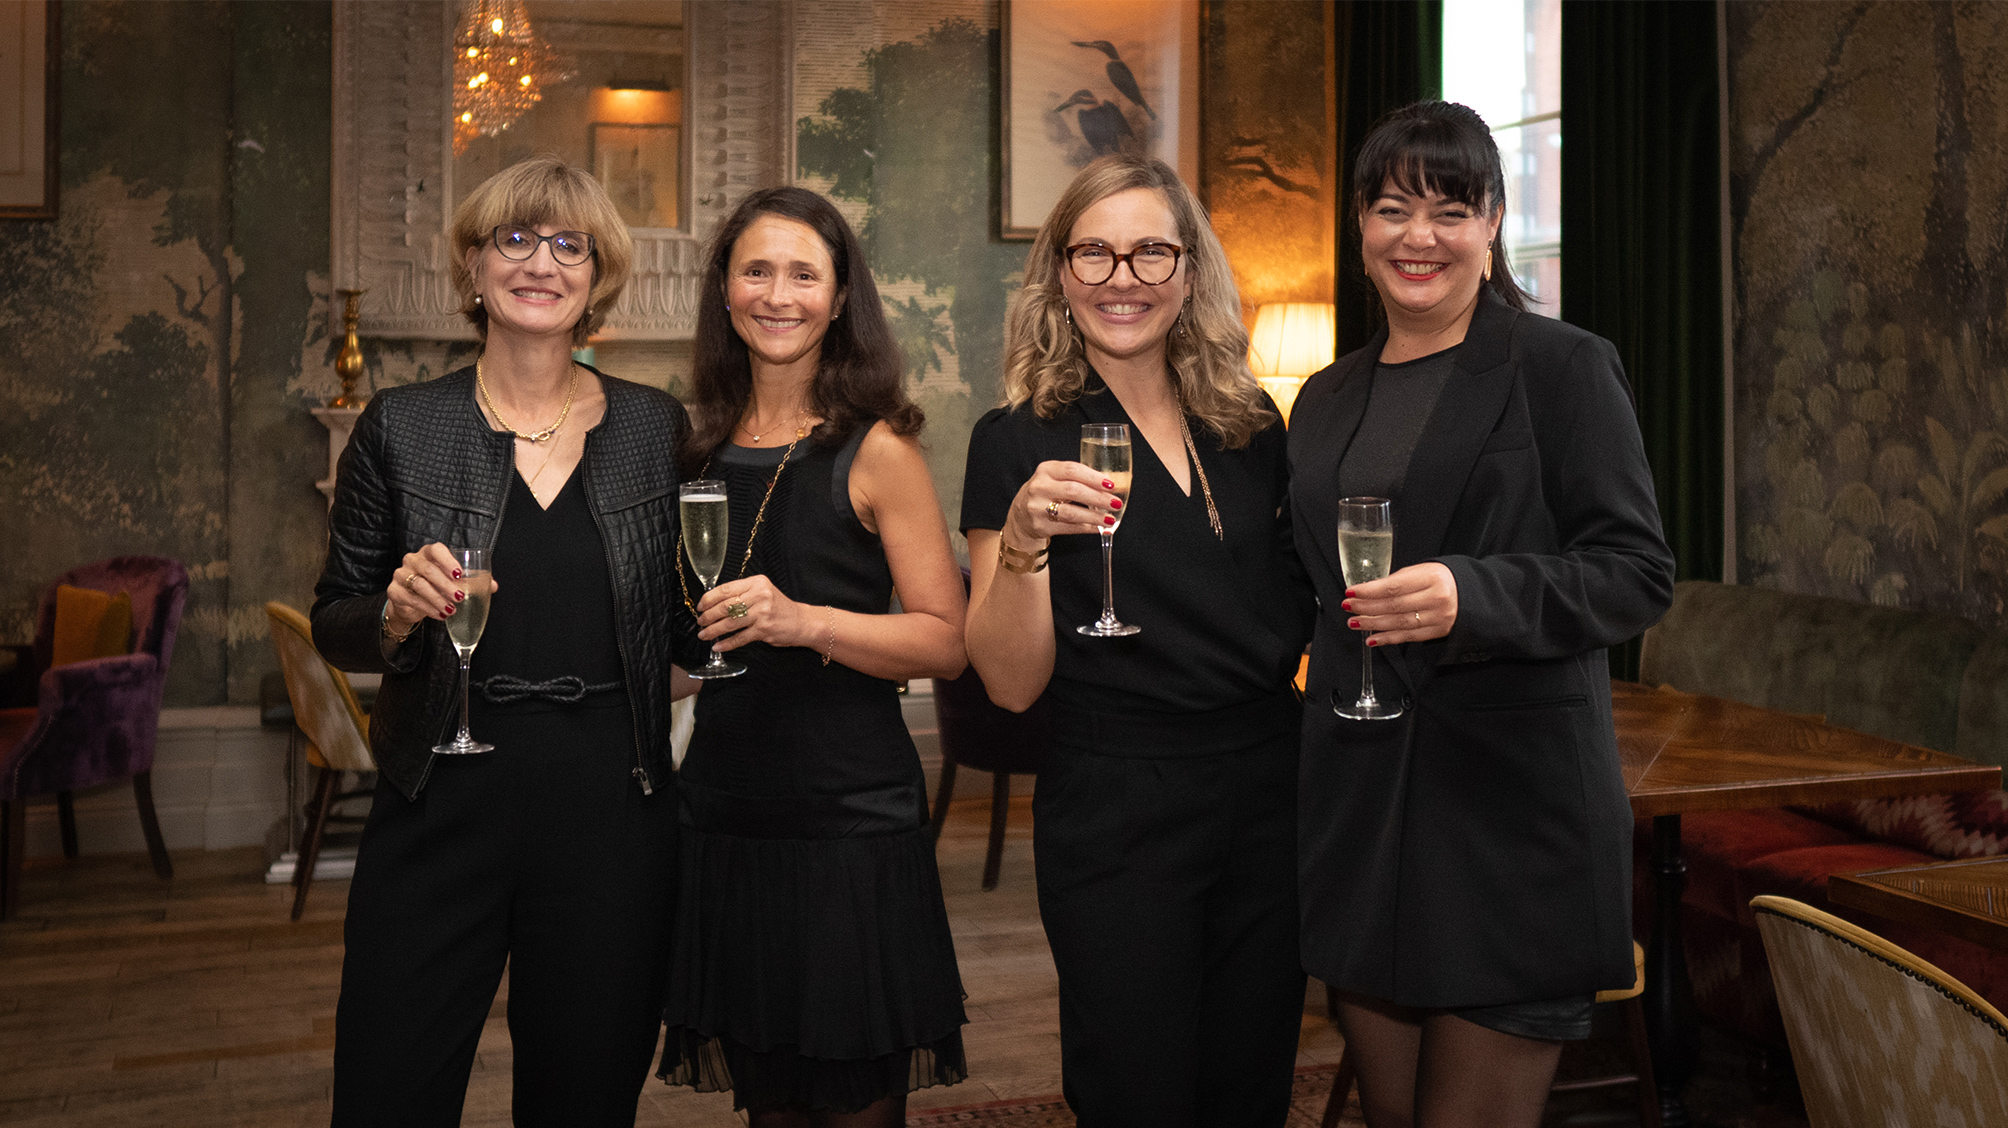 Visual aid: Four women posing at an event in a posh venue in London